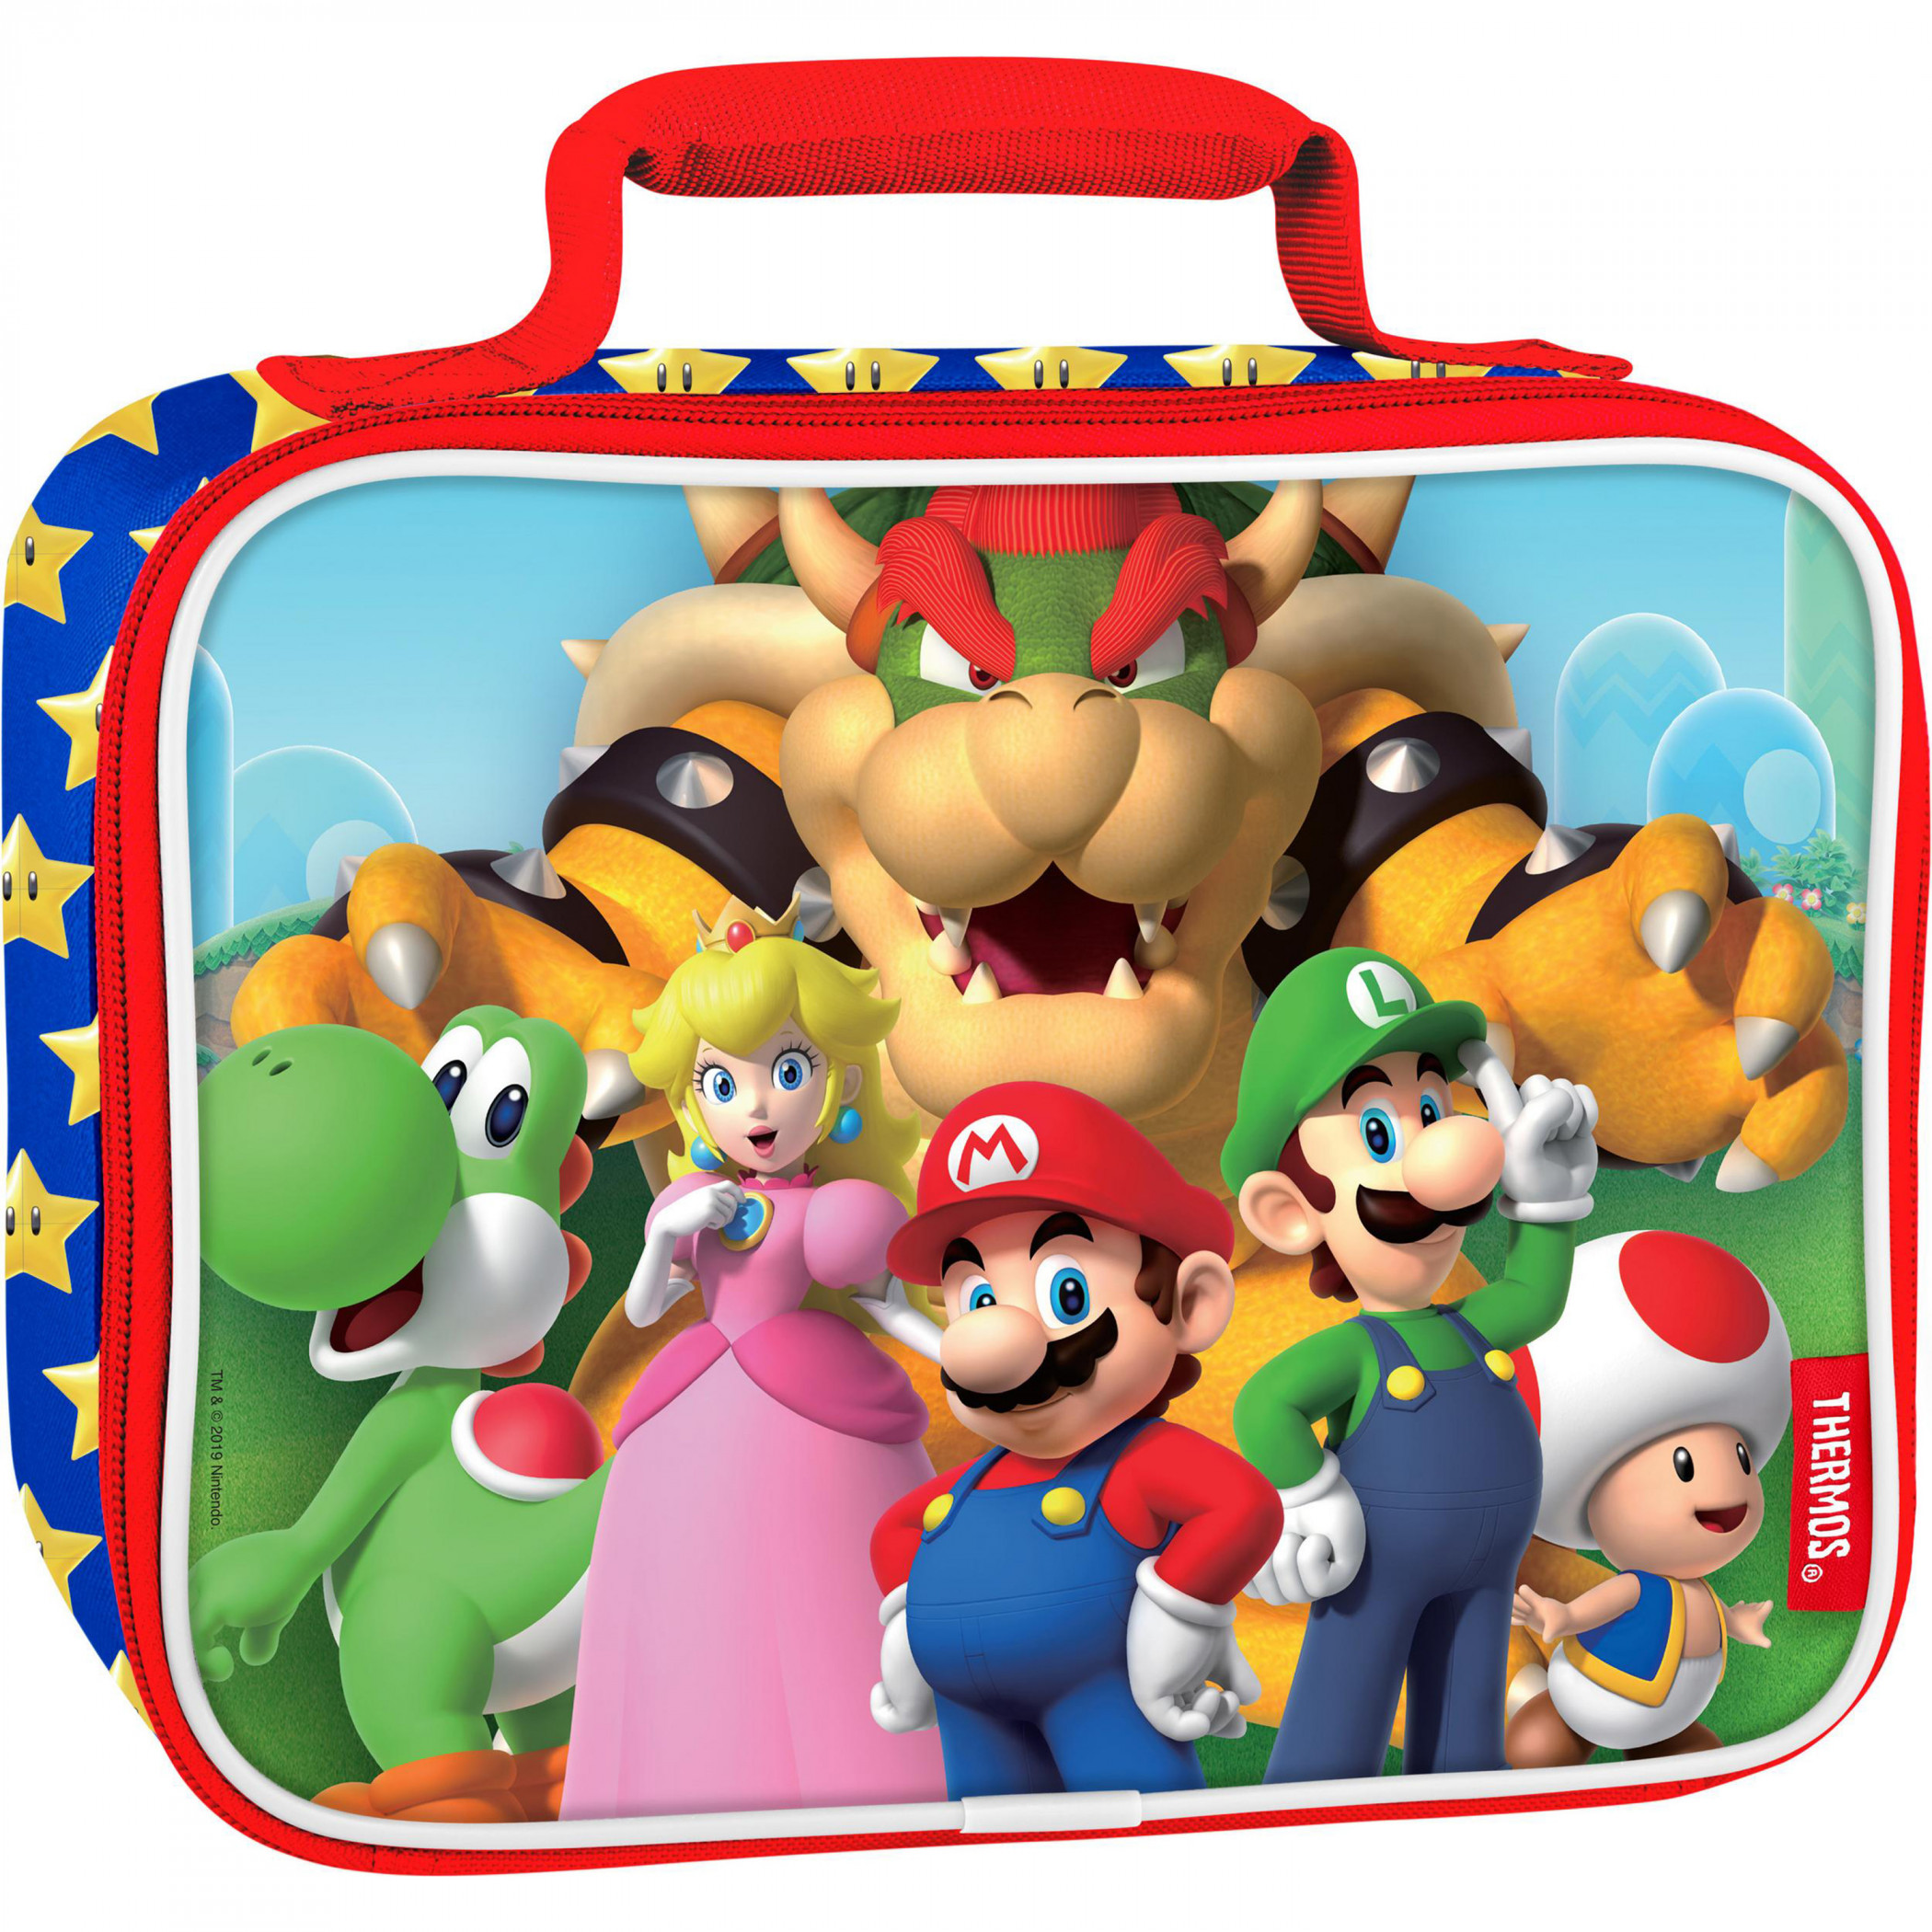 Super Mario Bros. Towering Bowser Thermos Insulated Lunch Box